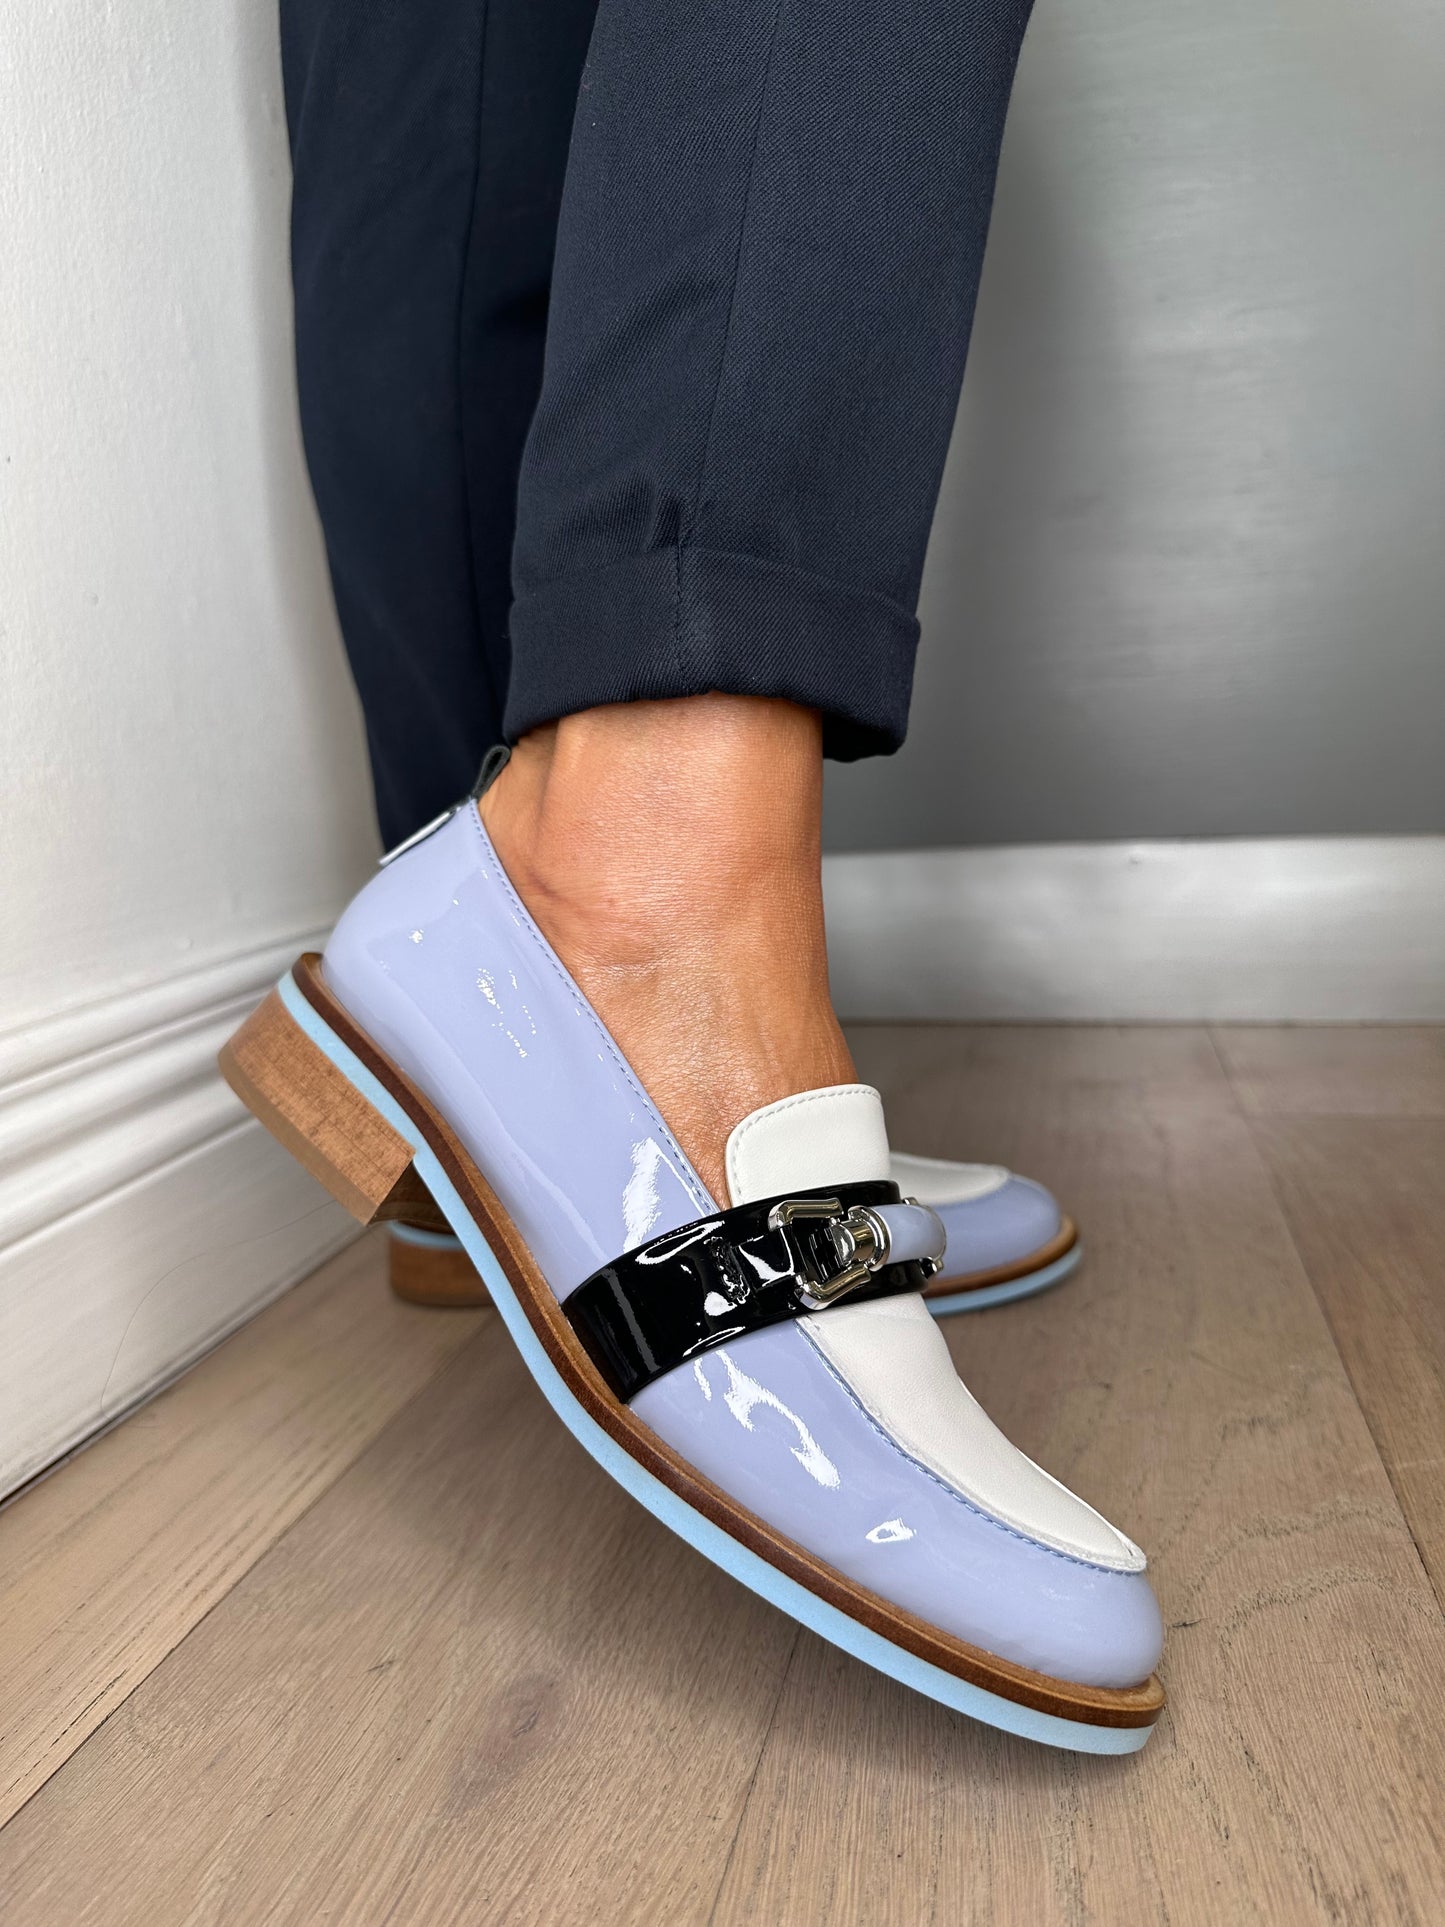 Marco Moreo - Pale Blue Patent Loafer With Dark Navy/White Patent Trim